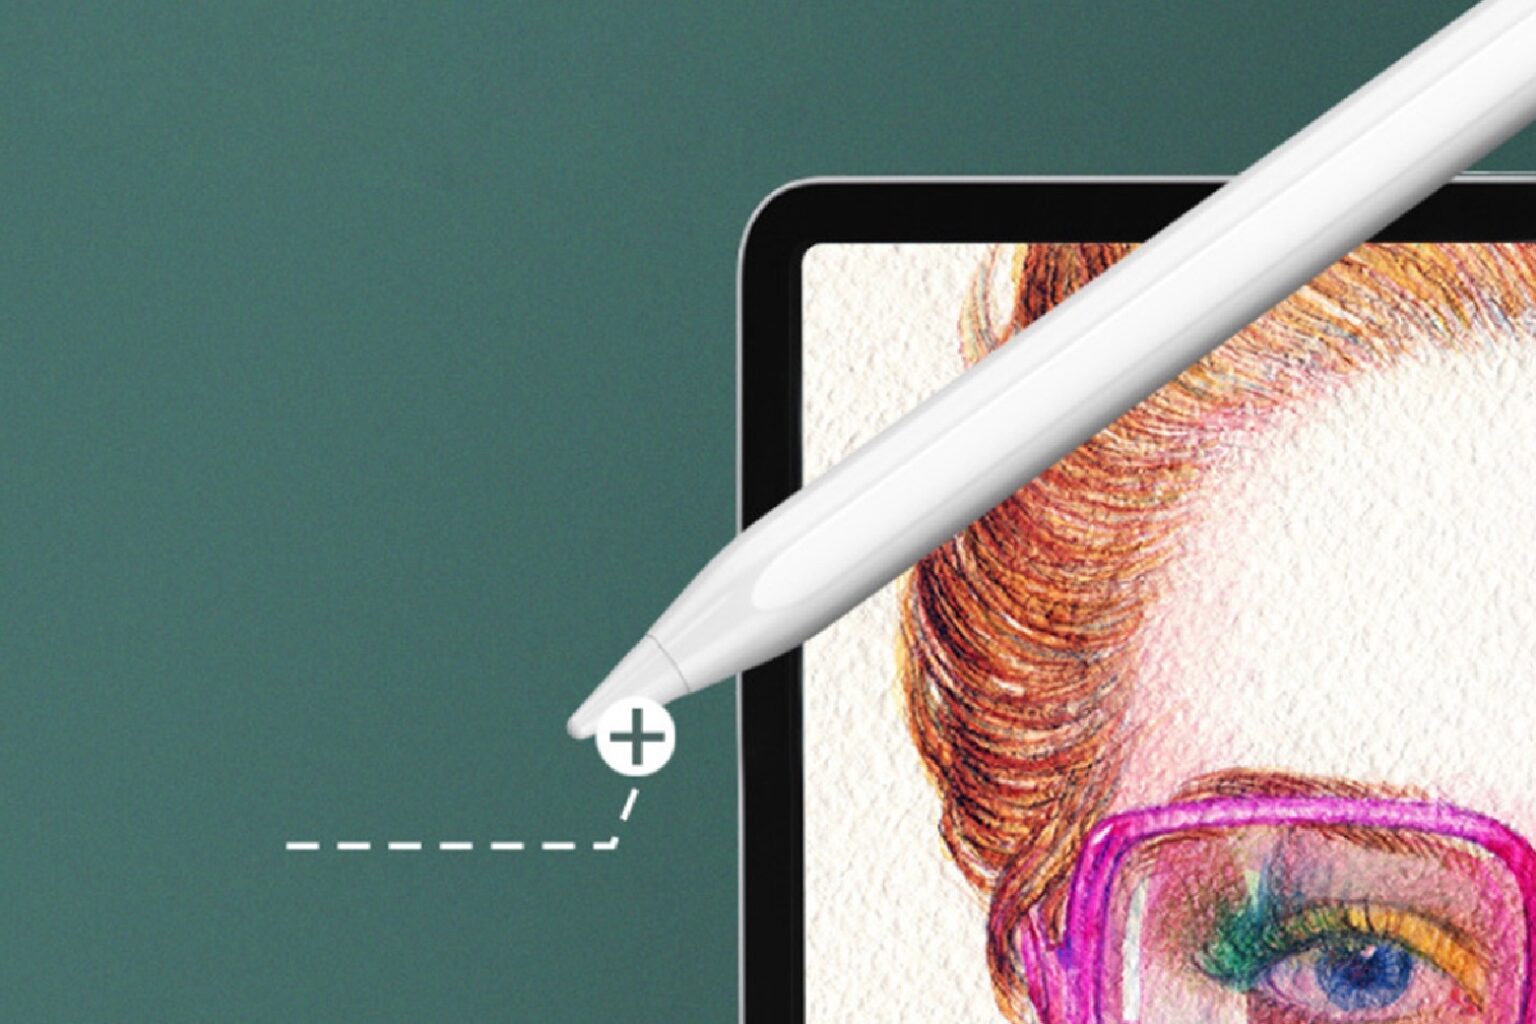 Gift idea: Turn any Apple lover's iPad into an art or design canvas with this $35 digital pen.